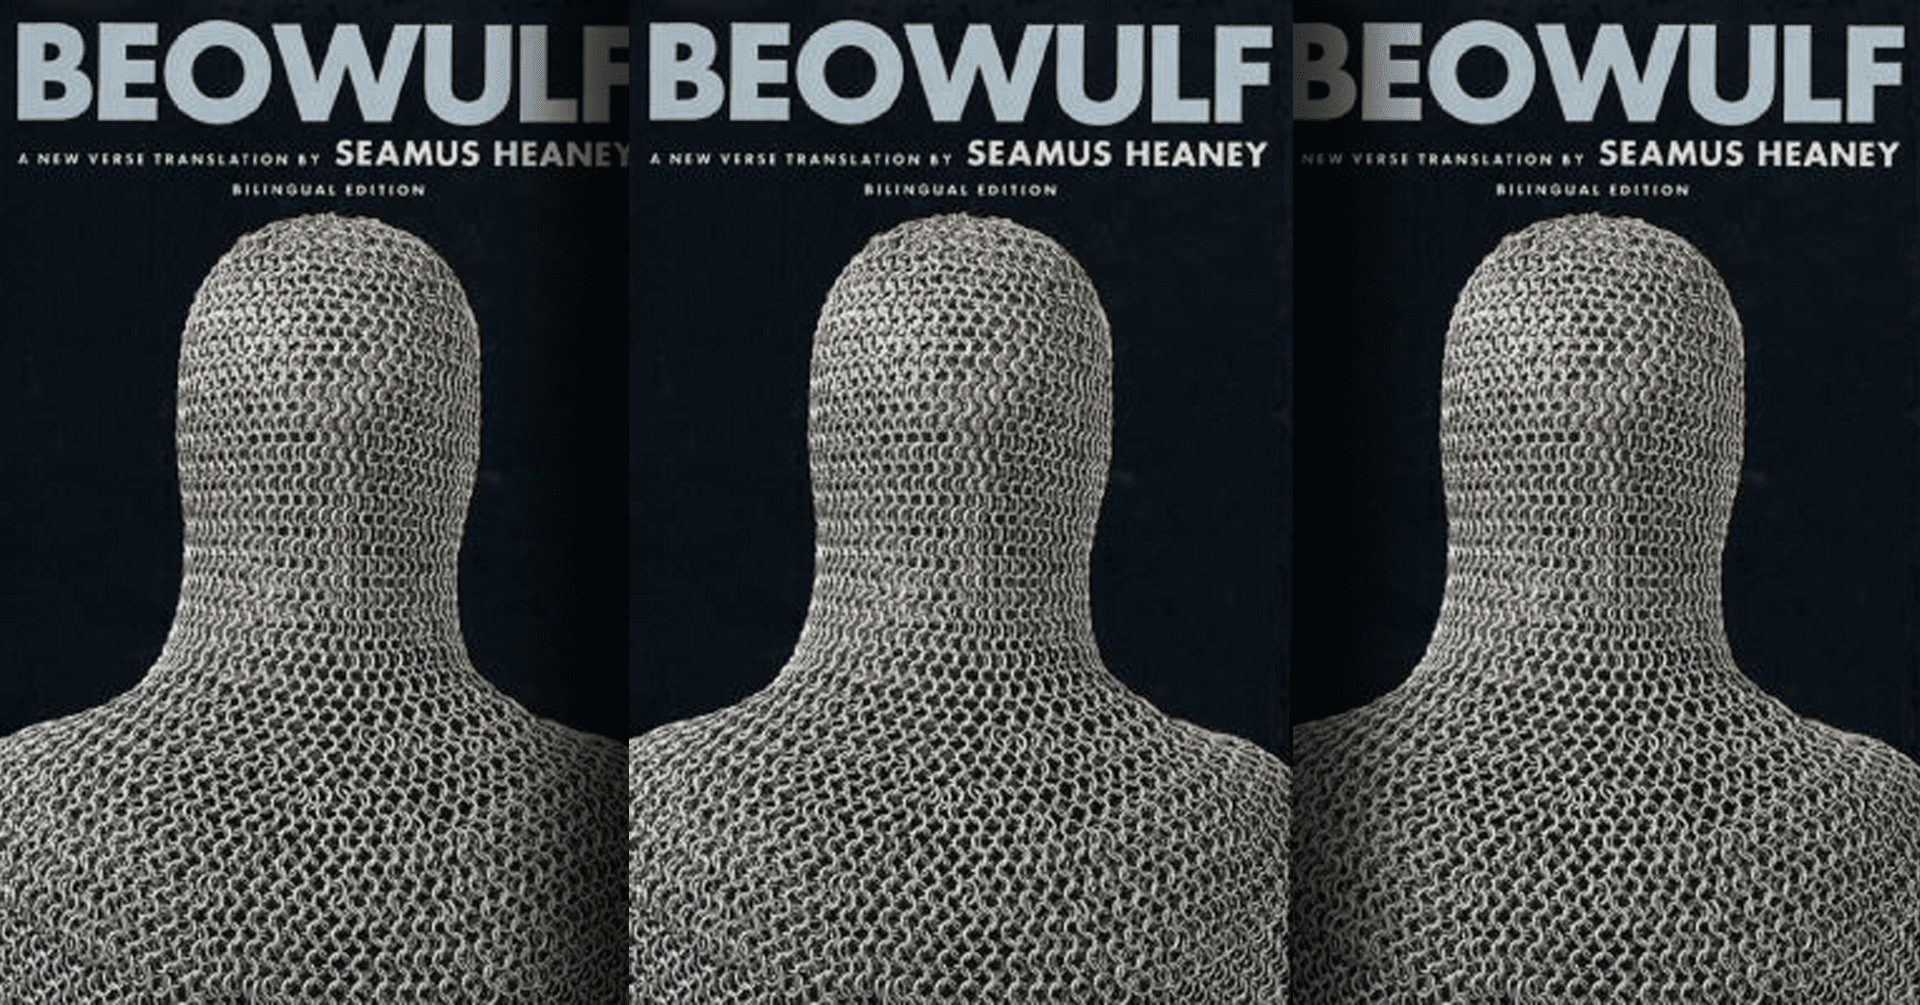 "Beowulf" by Seamus Heaney (book cover)